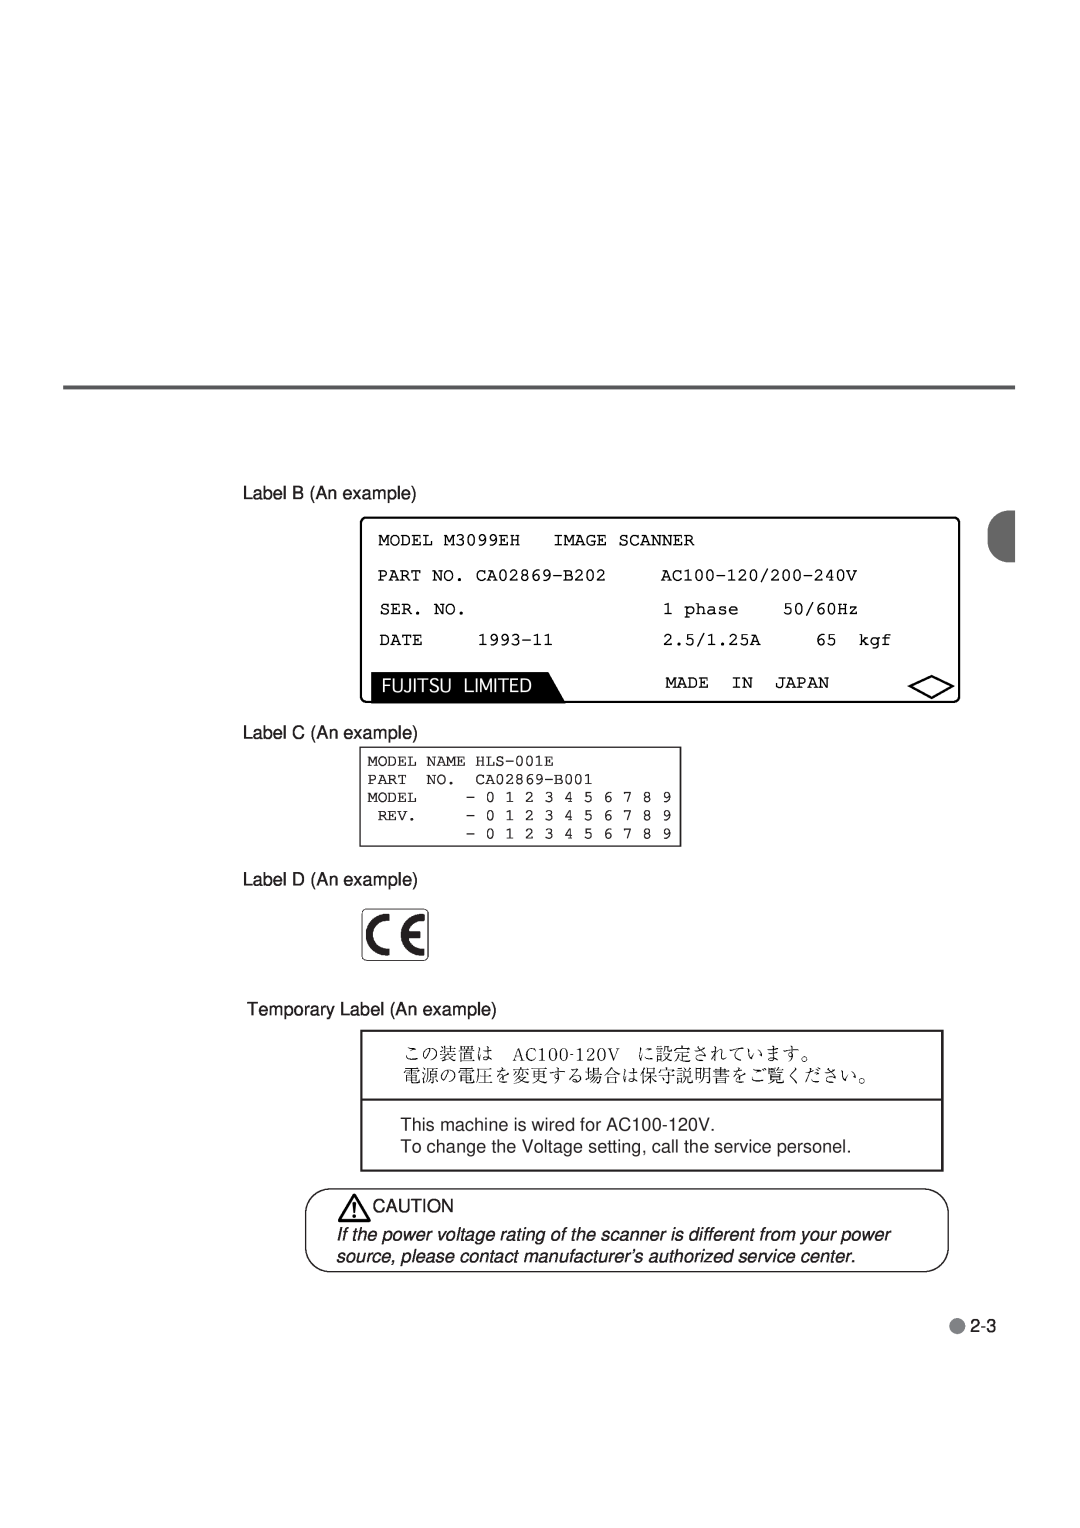 Fujitsu M3099EH, M3099GX, M3099GH, M3099EX manual Label B An example, Fujitsu, Limited, Label C An example, Label D An example 